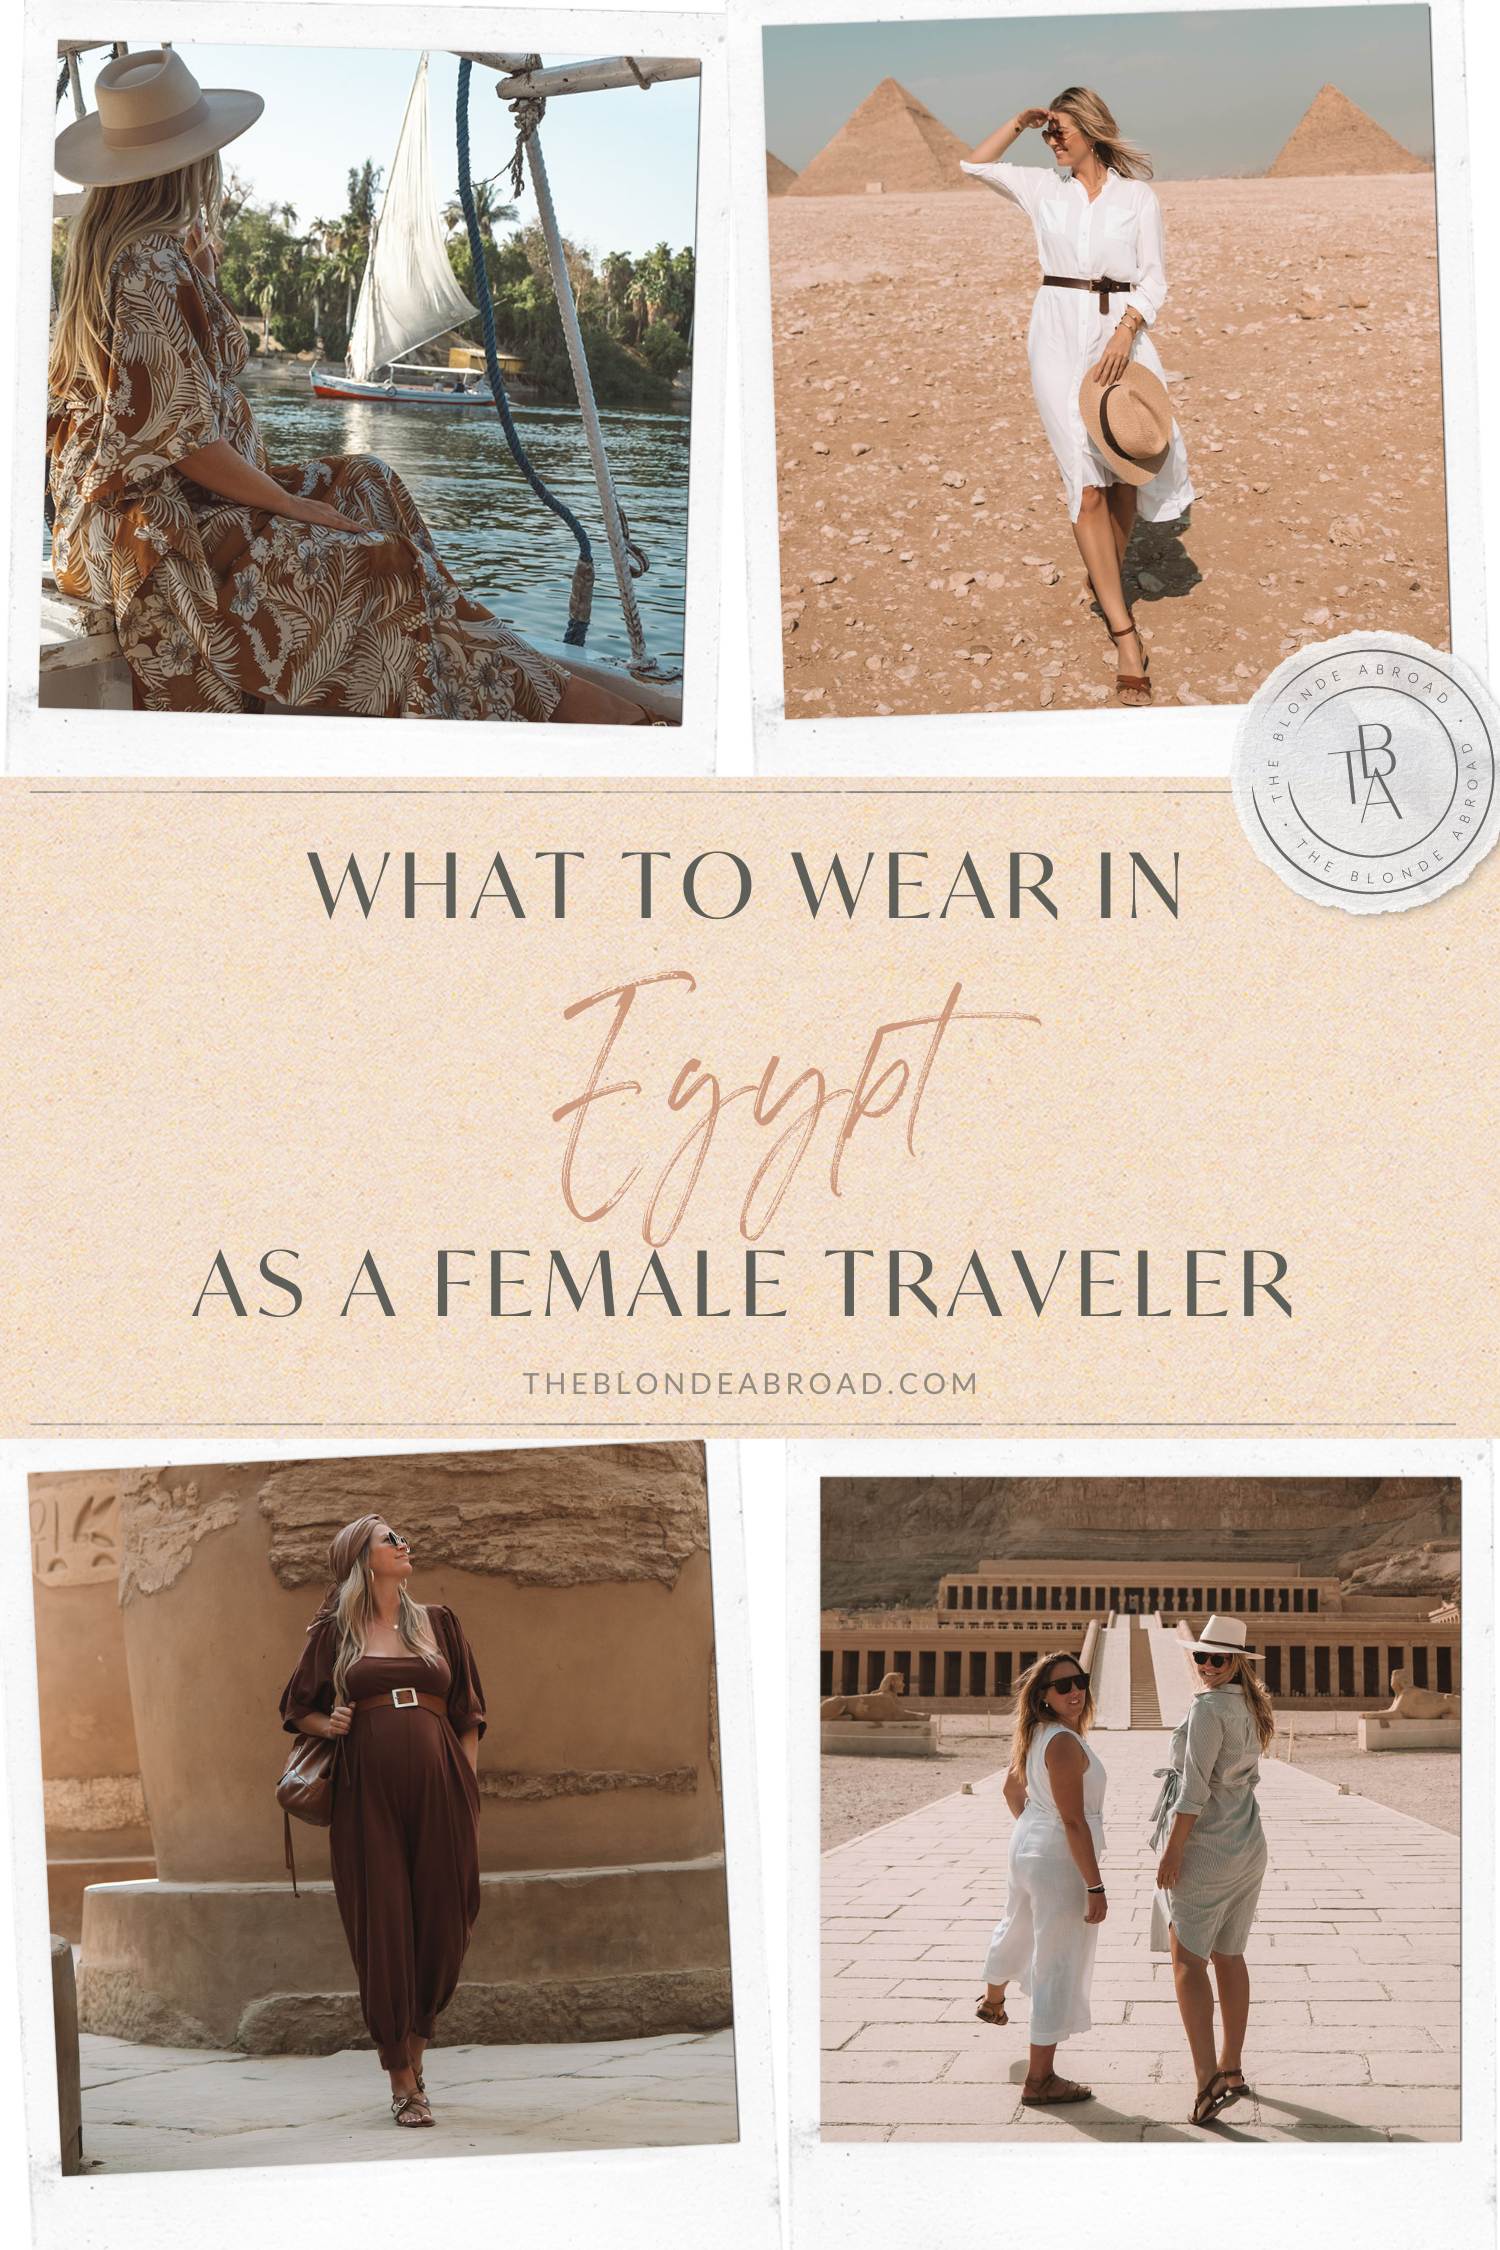 What To Wear in Egypt As A Female Traveler